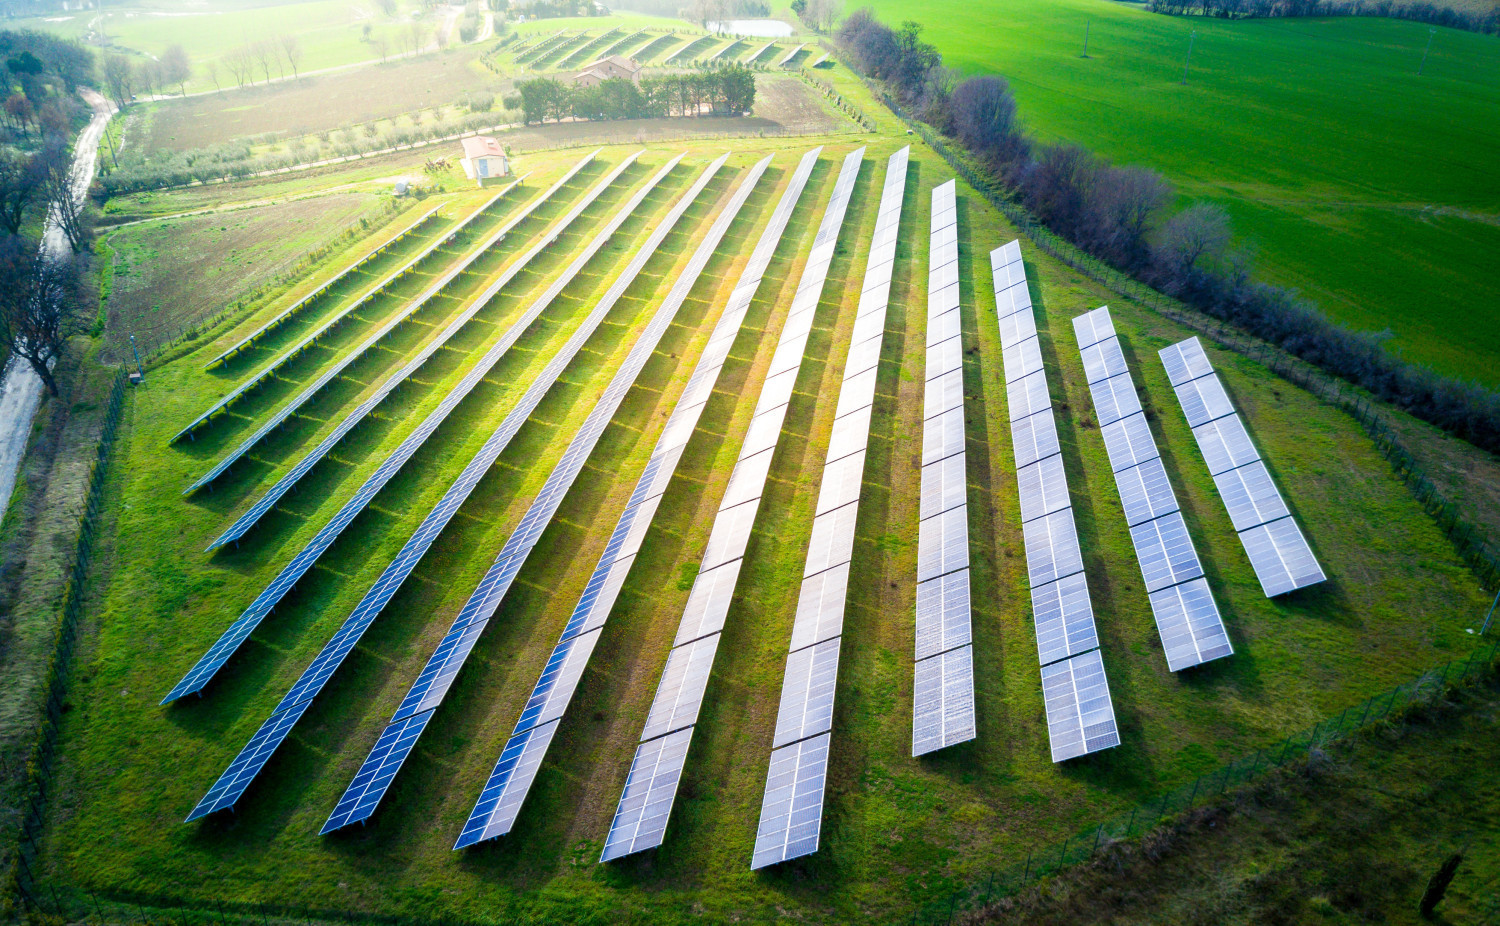 GoldenPeaks Capital has successfully implemented its photovoltaic projects Foxtrot and Gamma, with a total capacity of 176MW in 15 different regions in Poland.